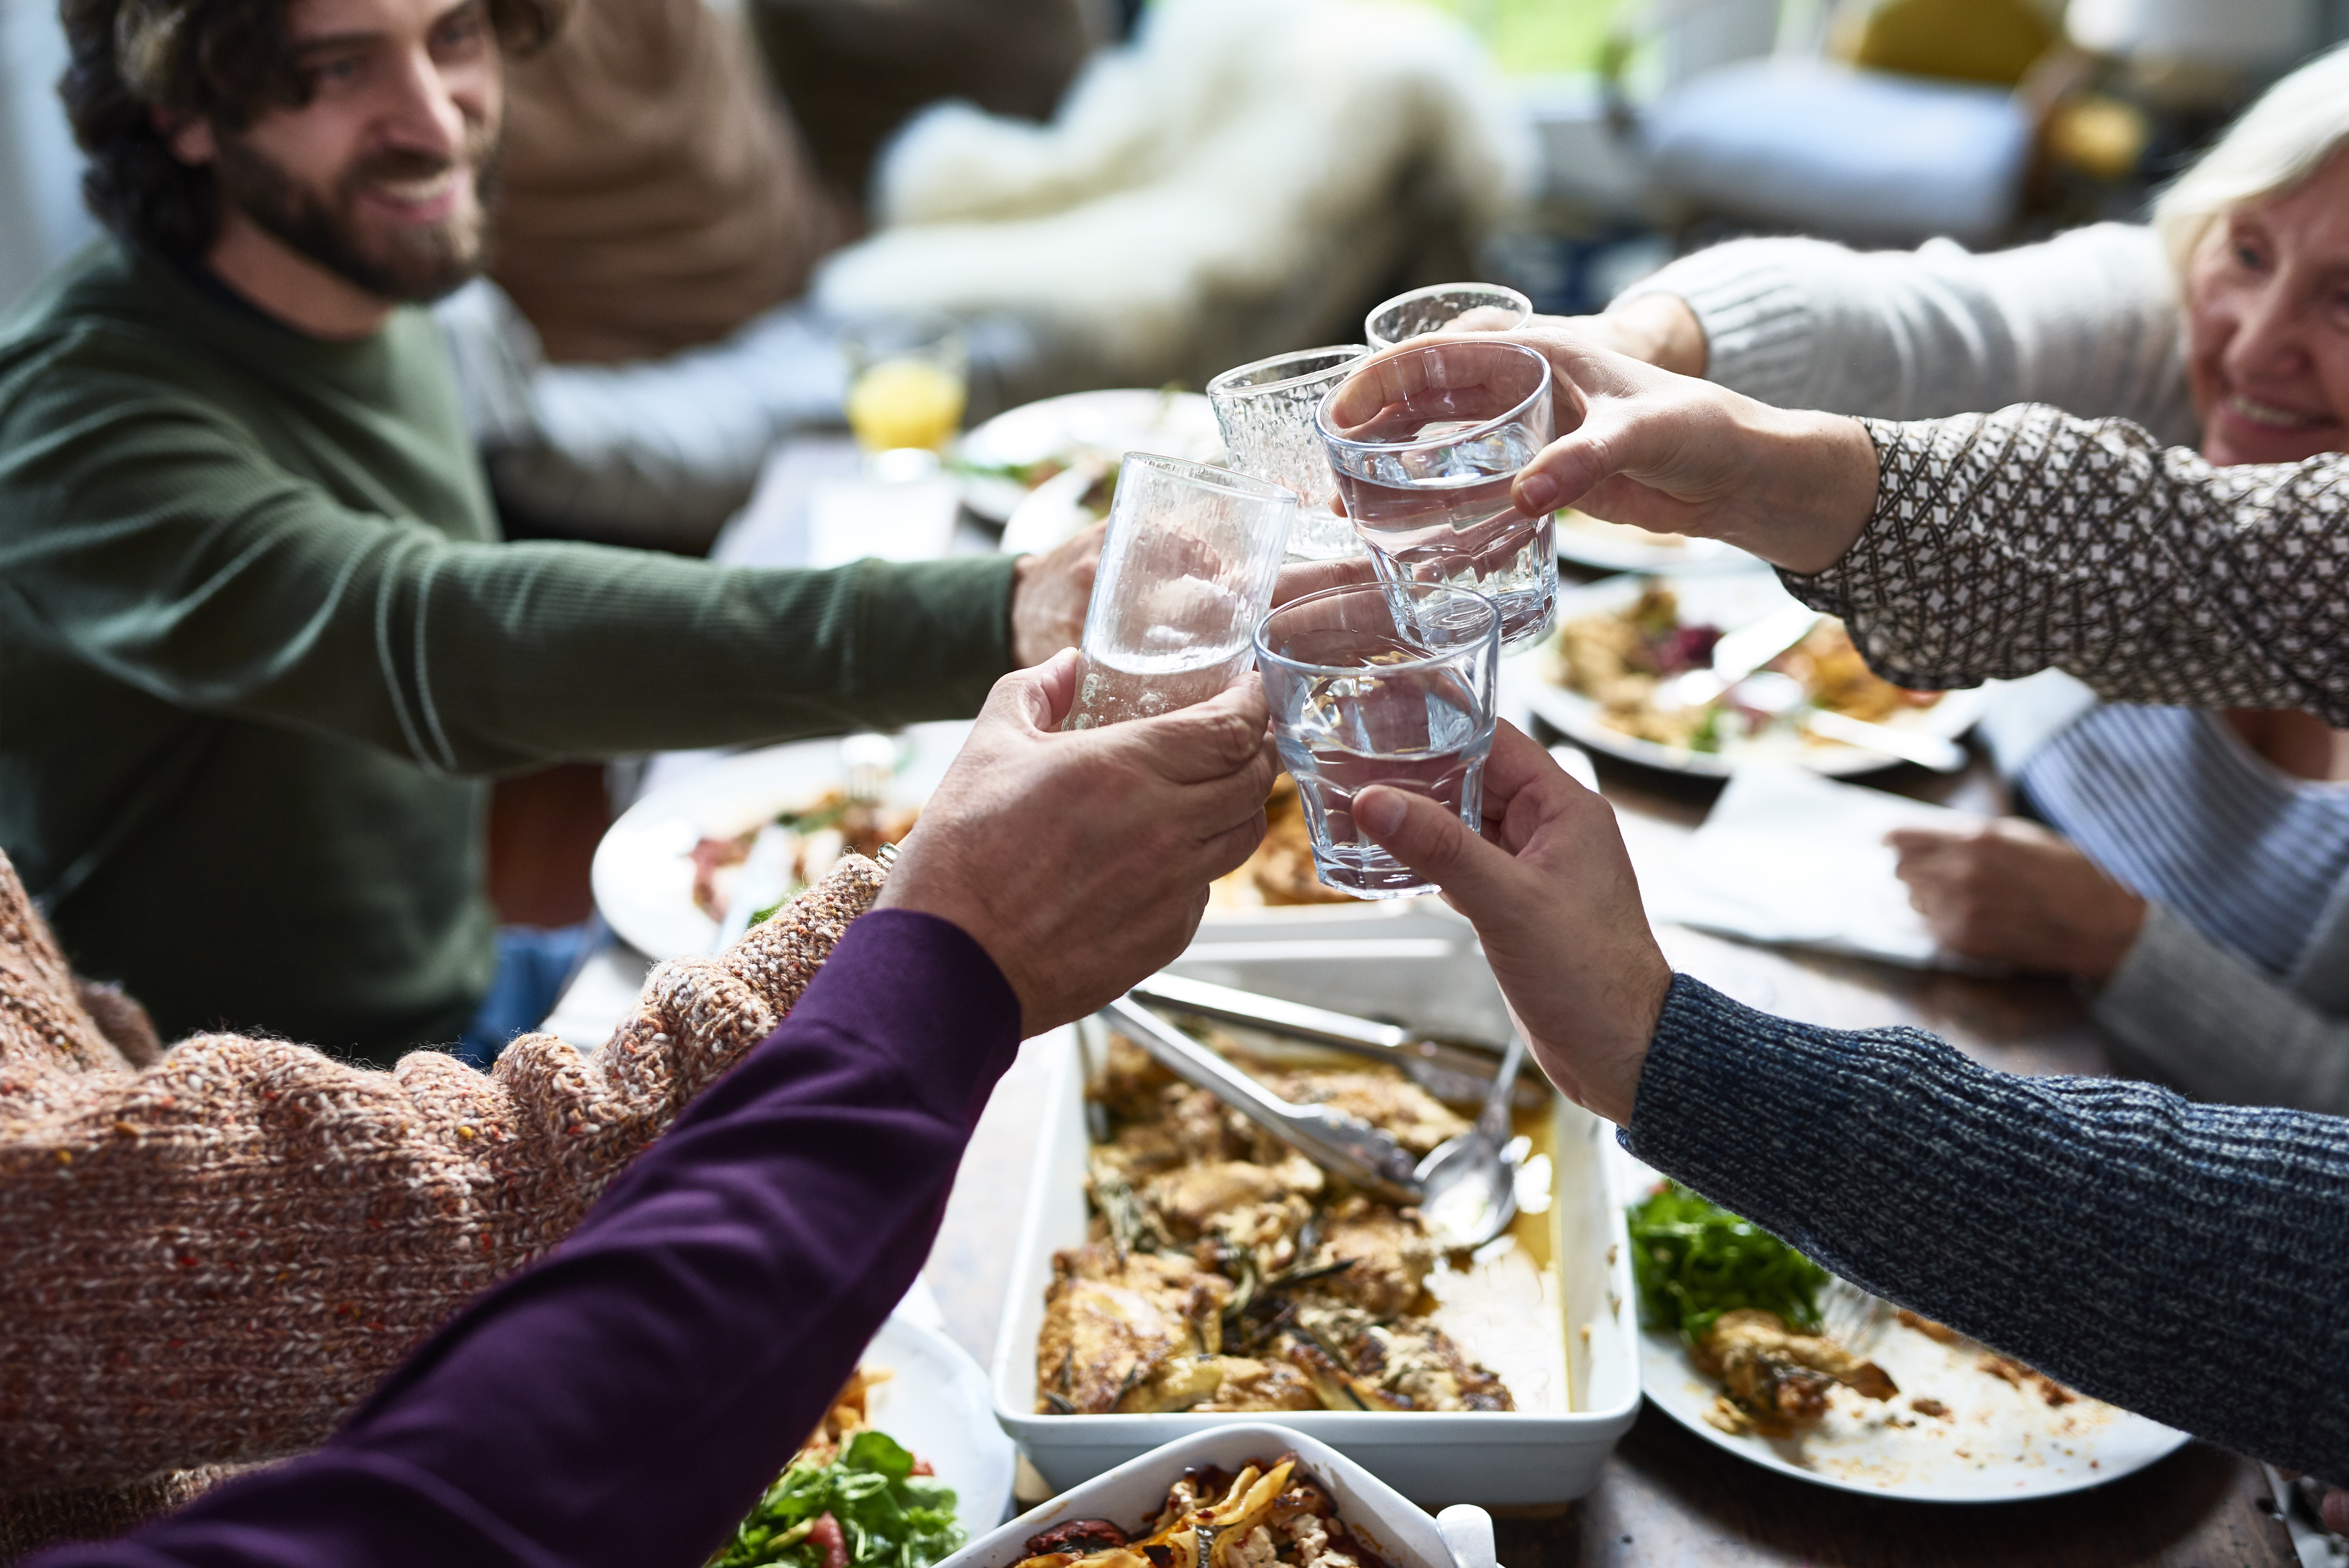 A group of people or relatives tasting drinks at a lunch